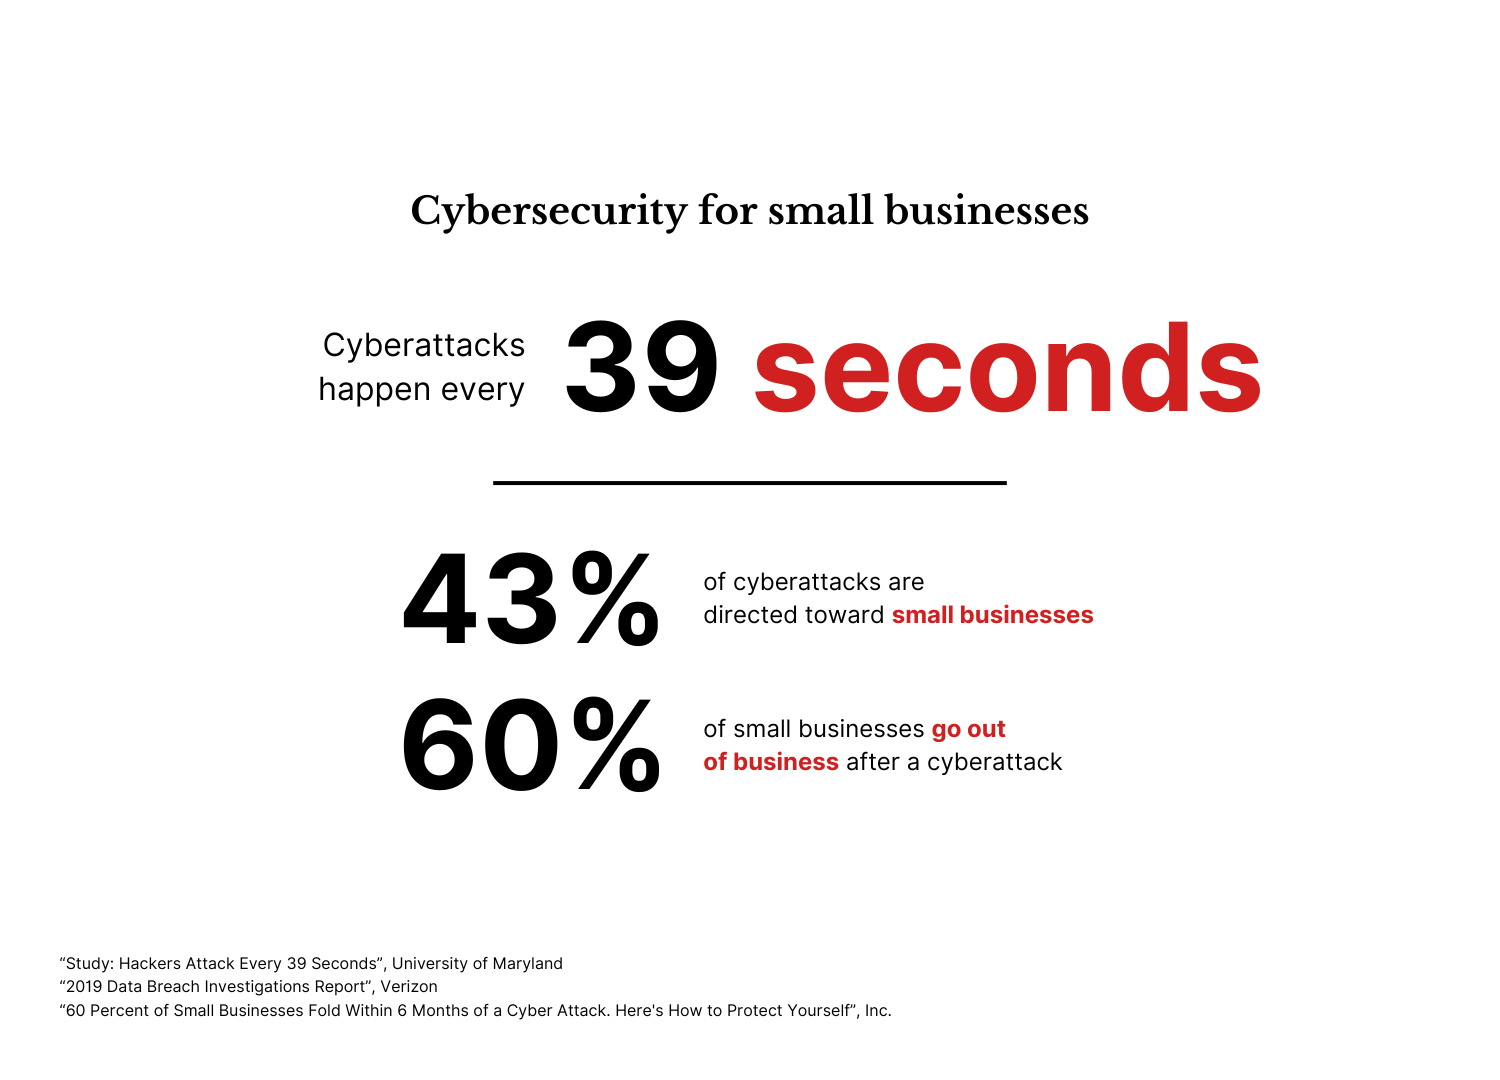 Infographic showing cybersecurity statistics for small businesses.